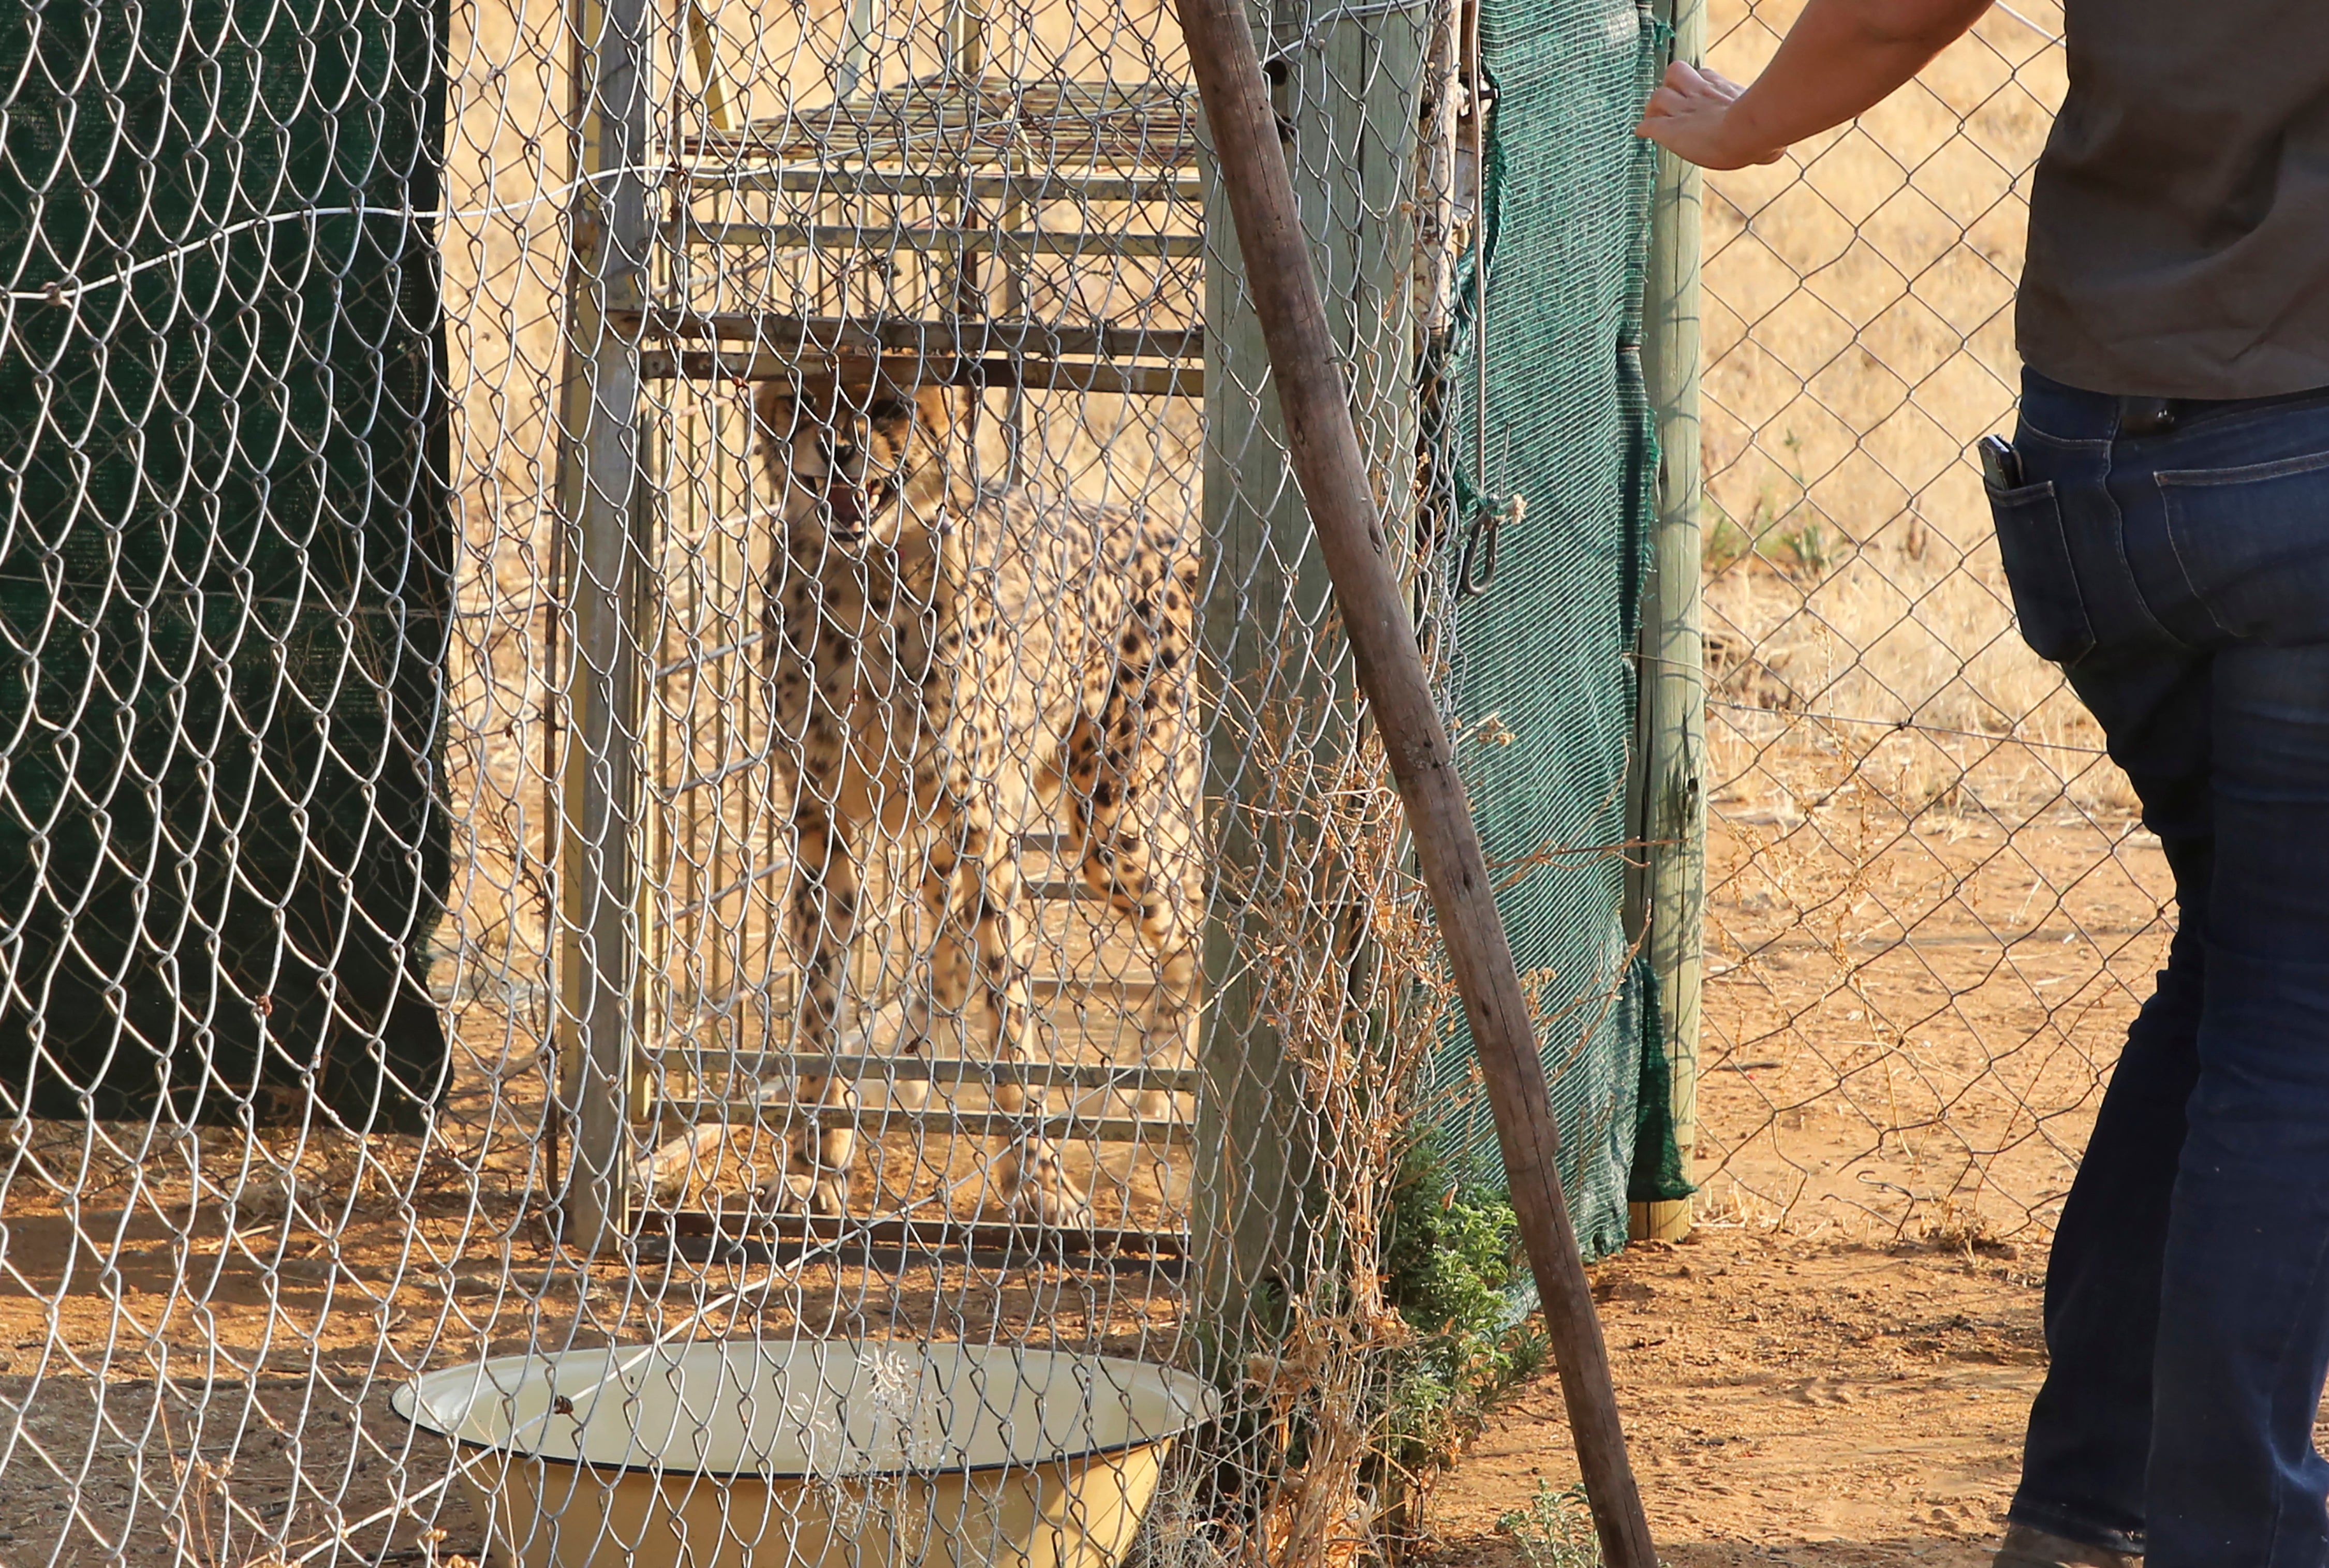 File: A cheetah lies inside a transport cage at the Cheetah Conservation Fund (CCF) in Otjiwarongo, Namibia